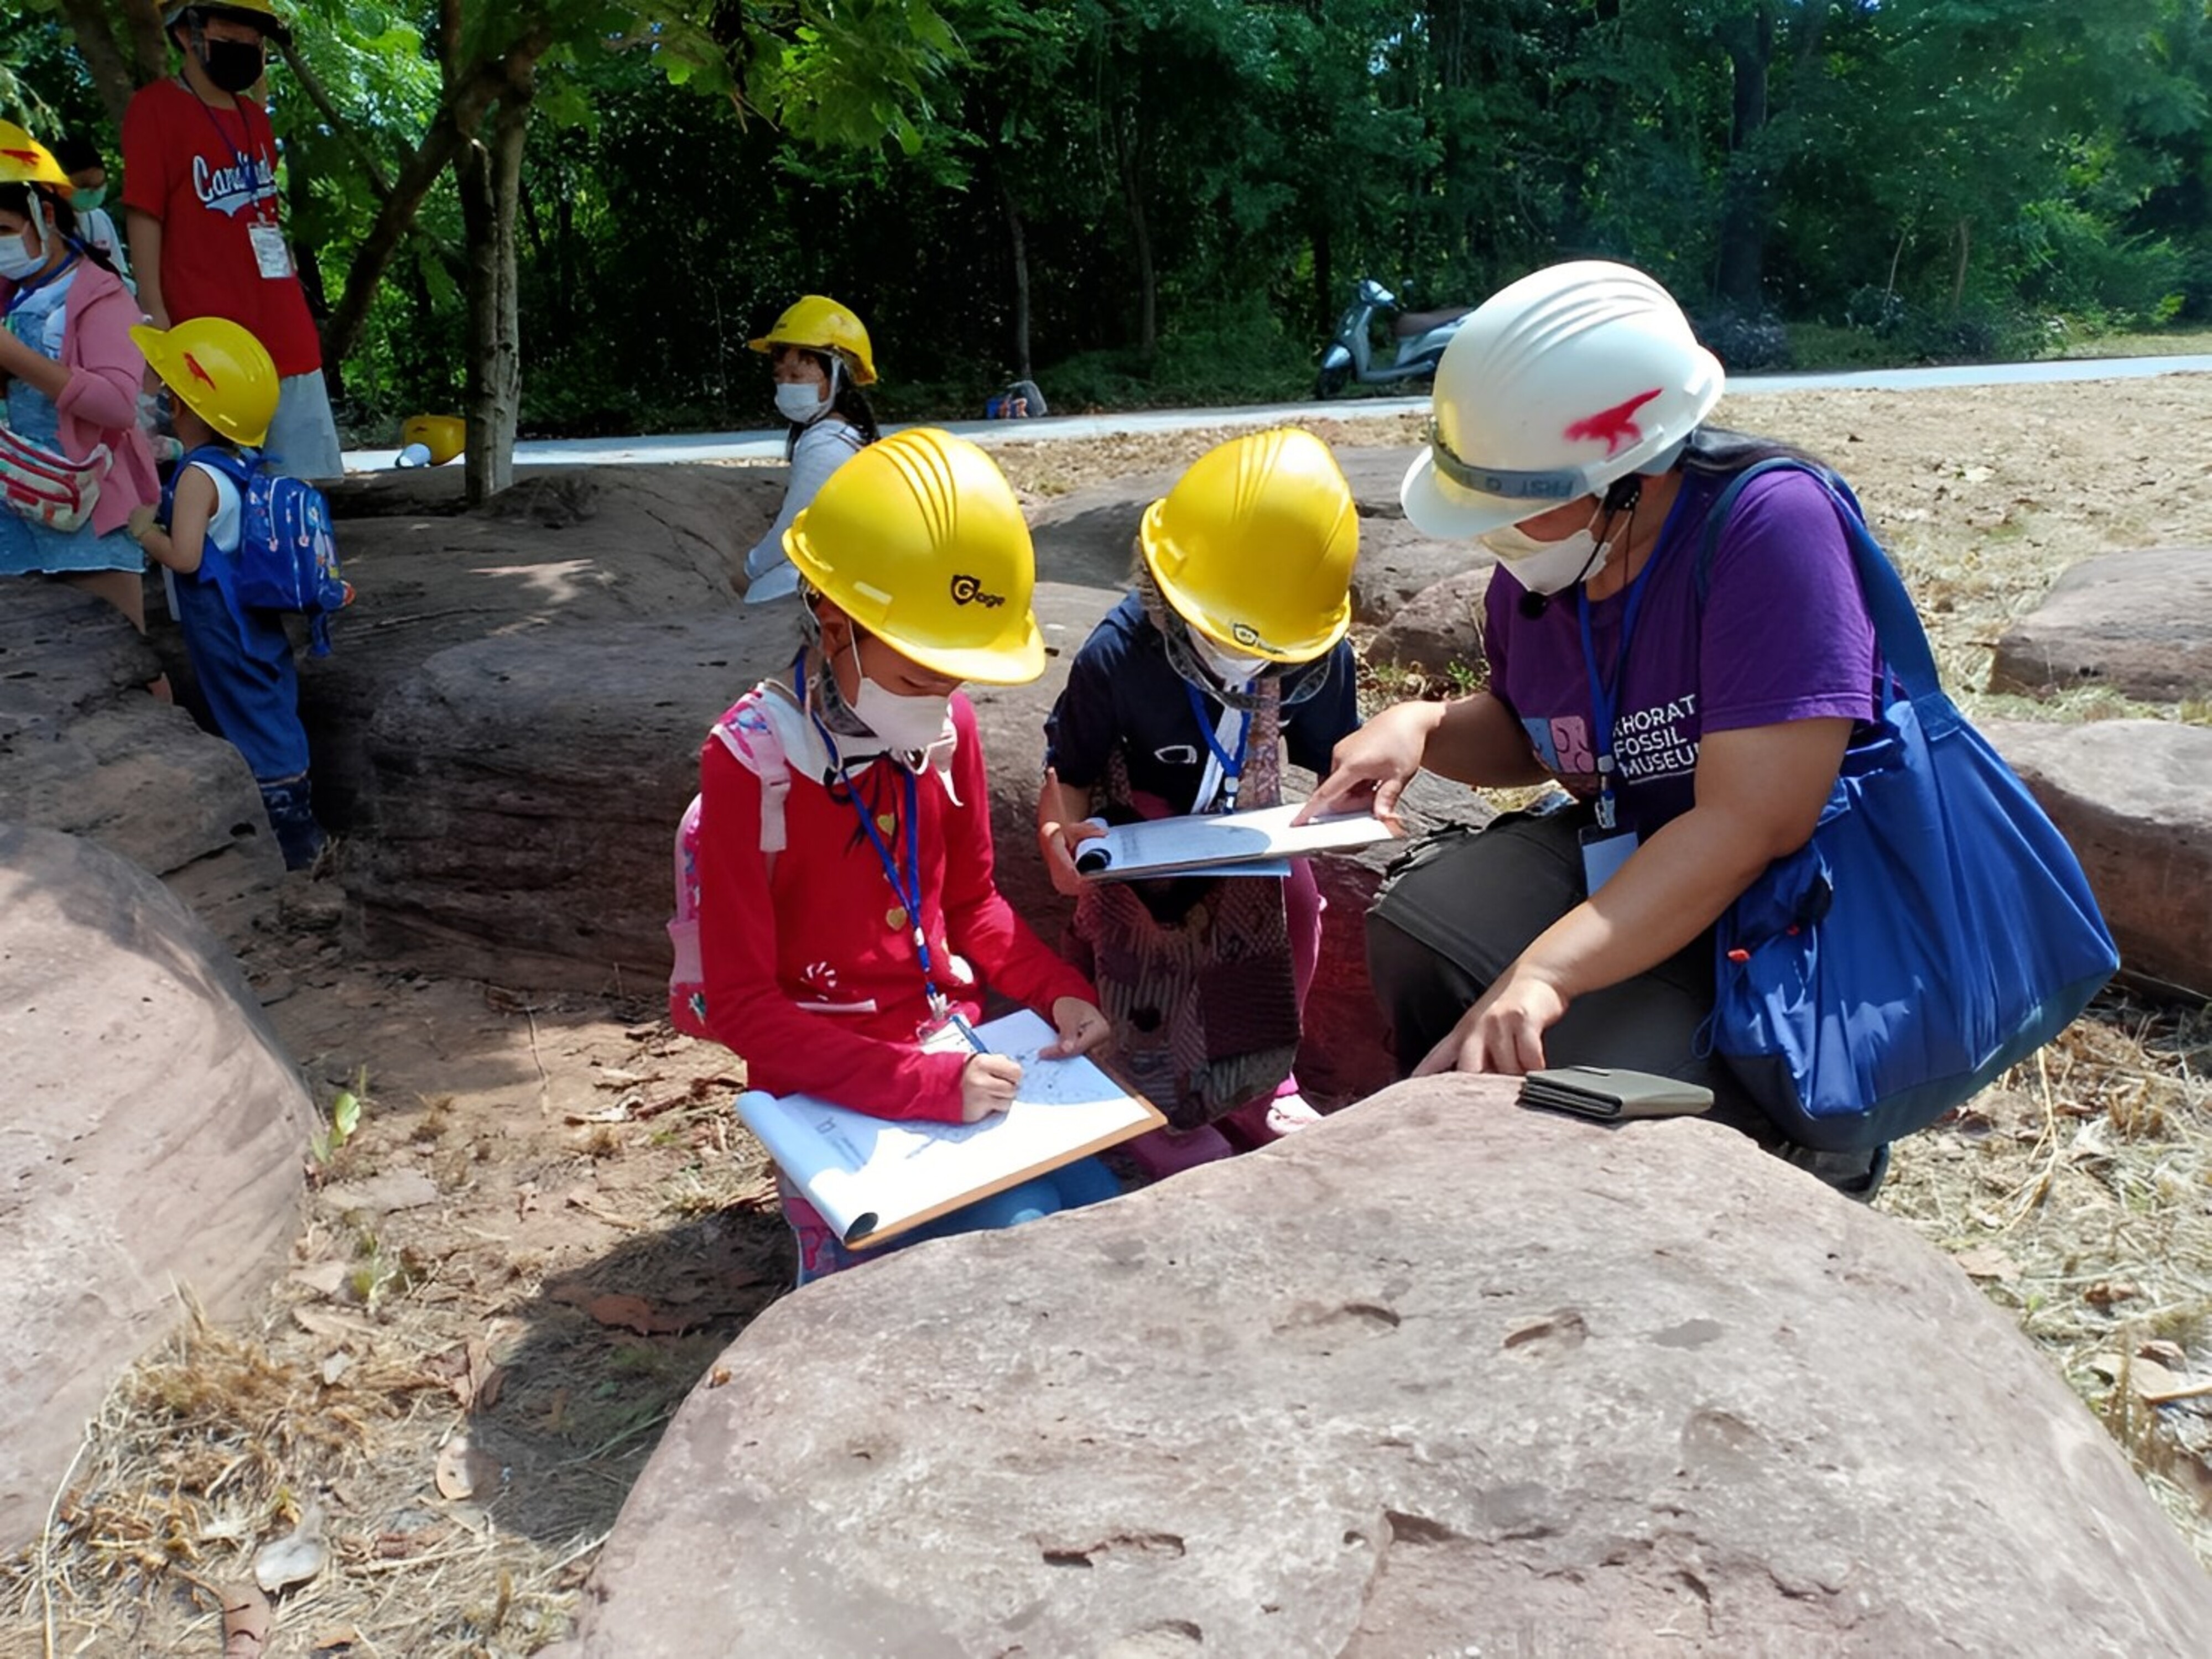 School children look for fossils during an educational activity in Khorat UNESCO Global Geopark, Thailand